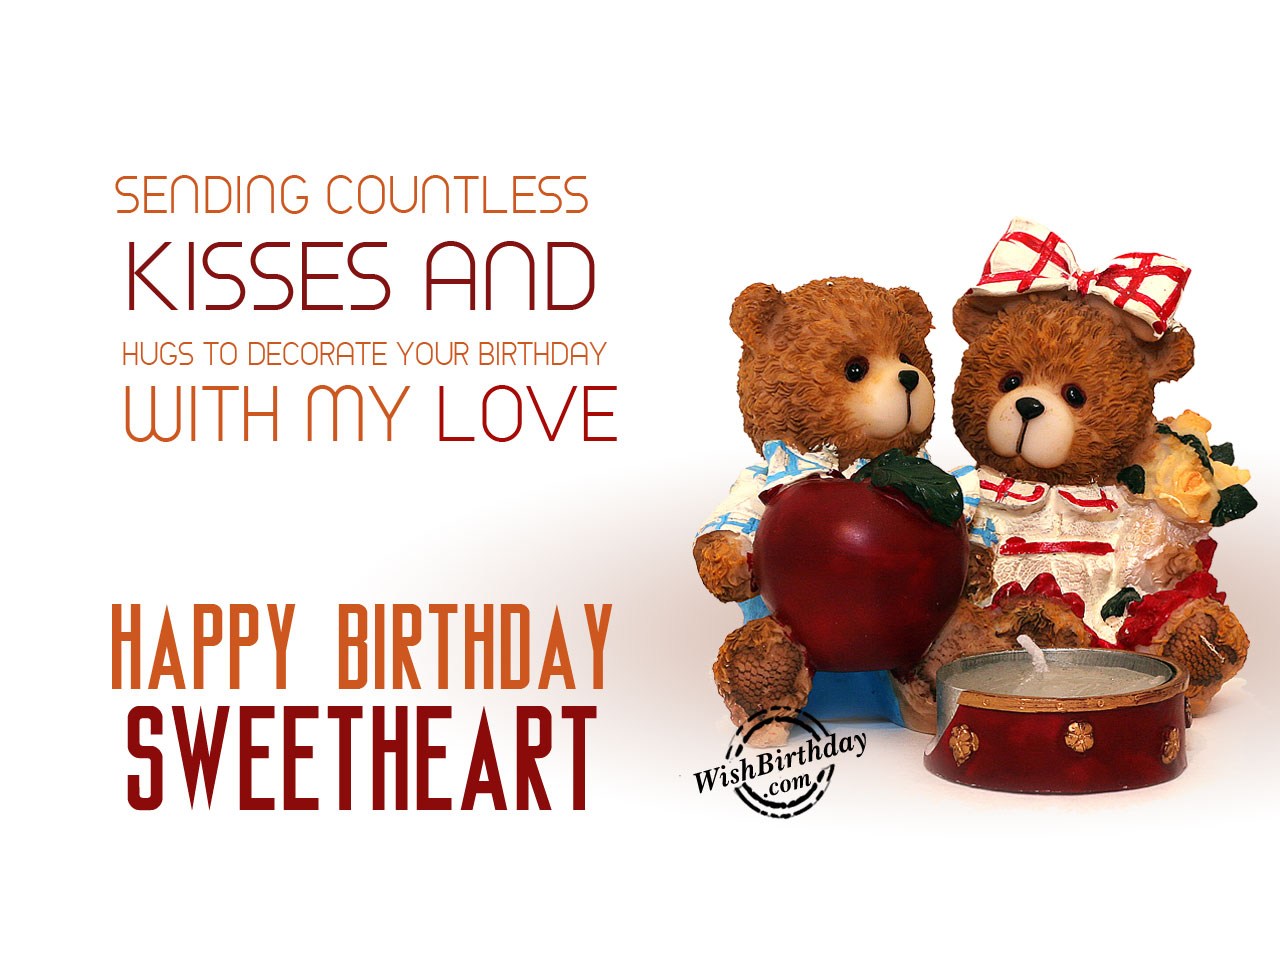 Sending countless kisses and hugs - Birthday Wishes, Happy ...